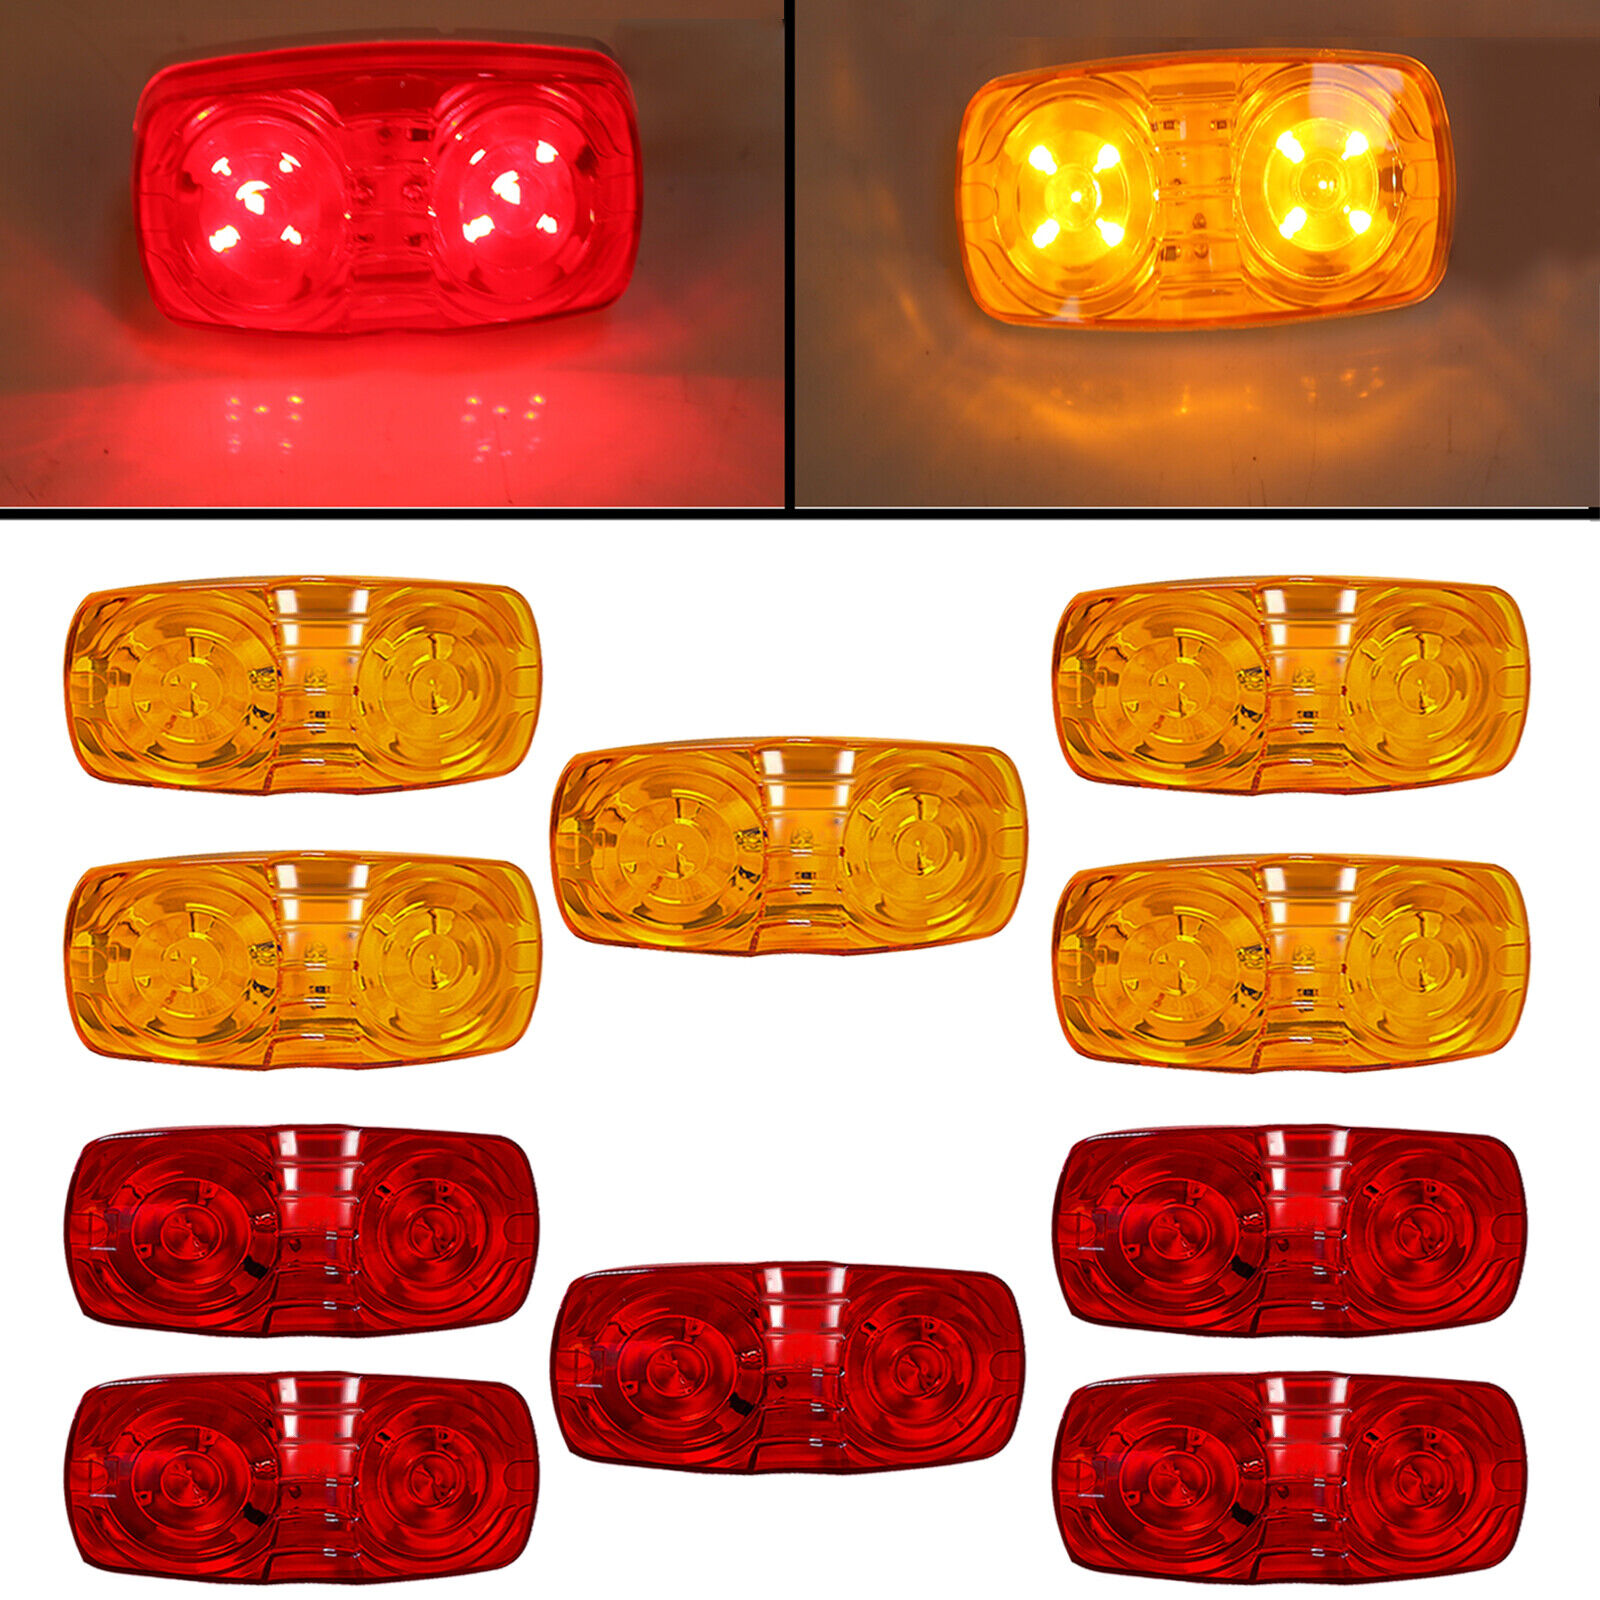 10x Trailer Marker LED Light Double Bullseye 10 Diodes Clearance Lamp Red/Amber